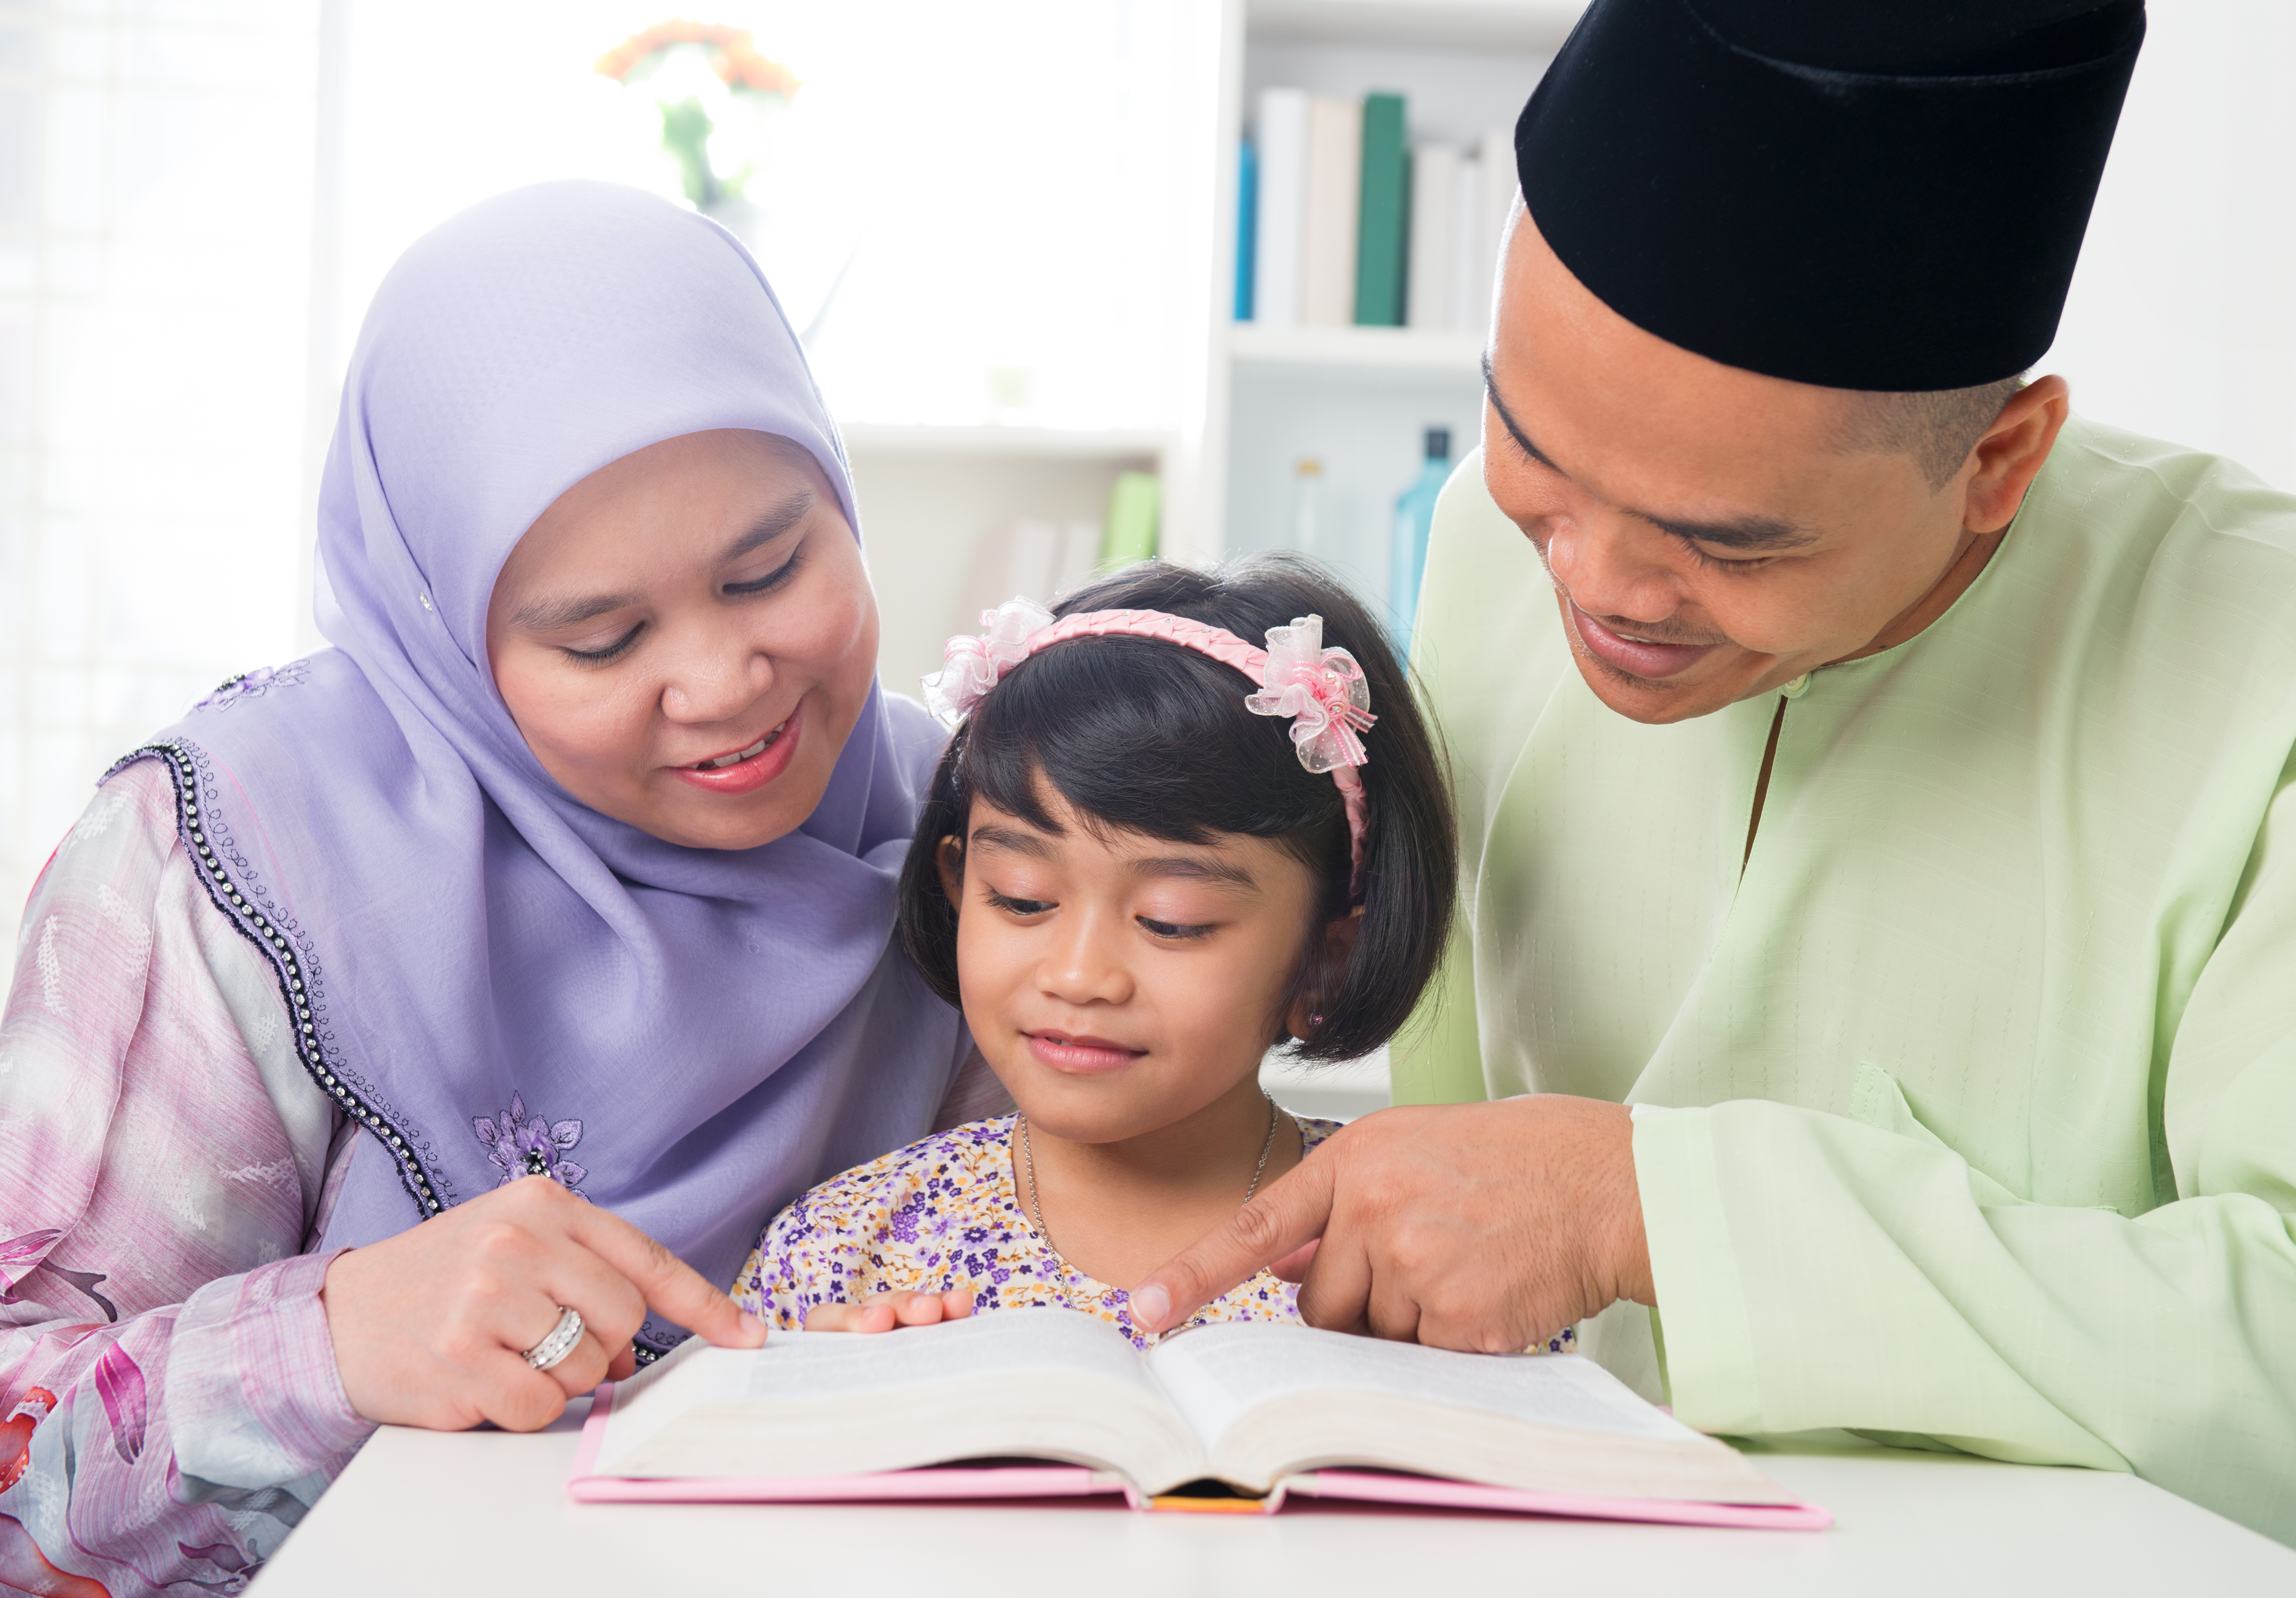 How to raise children in Islam traditions while living in non-Islam